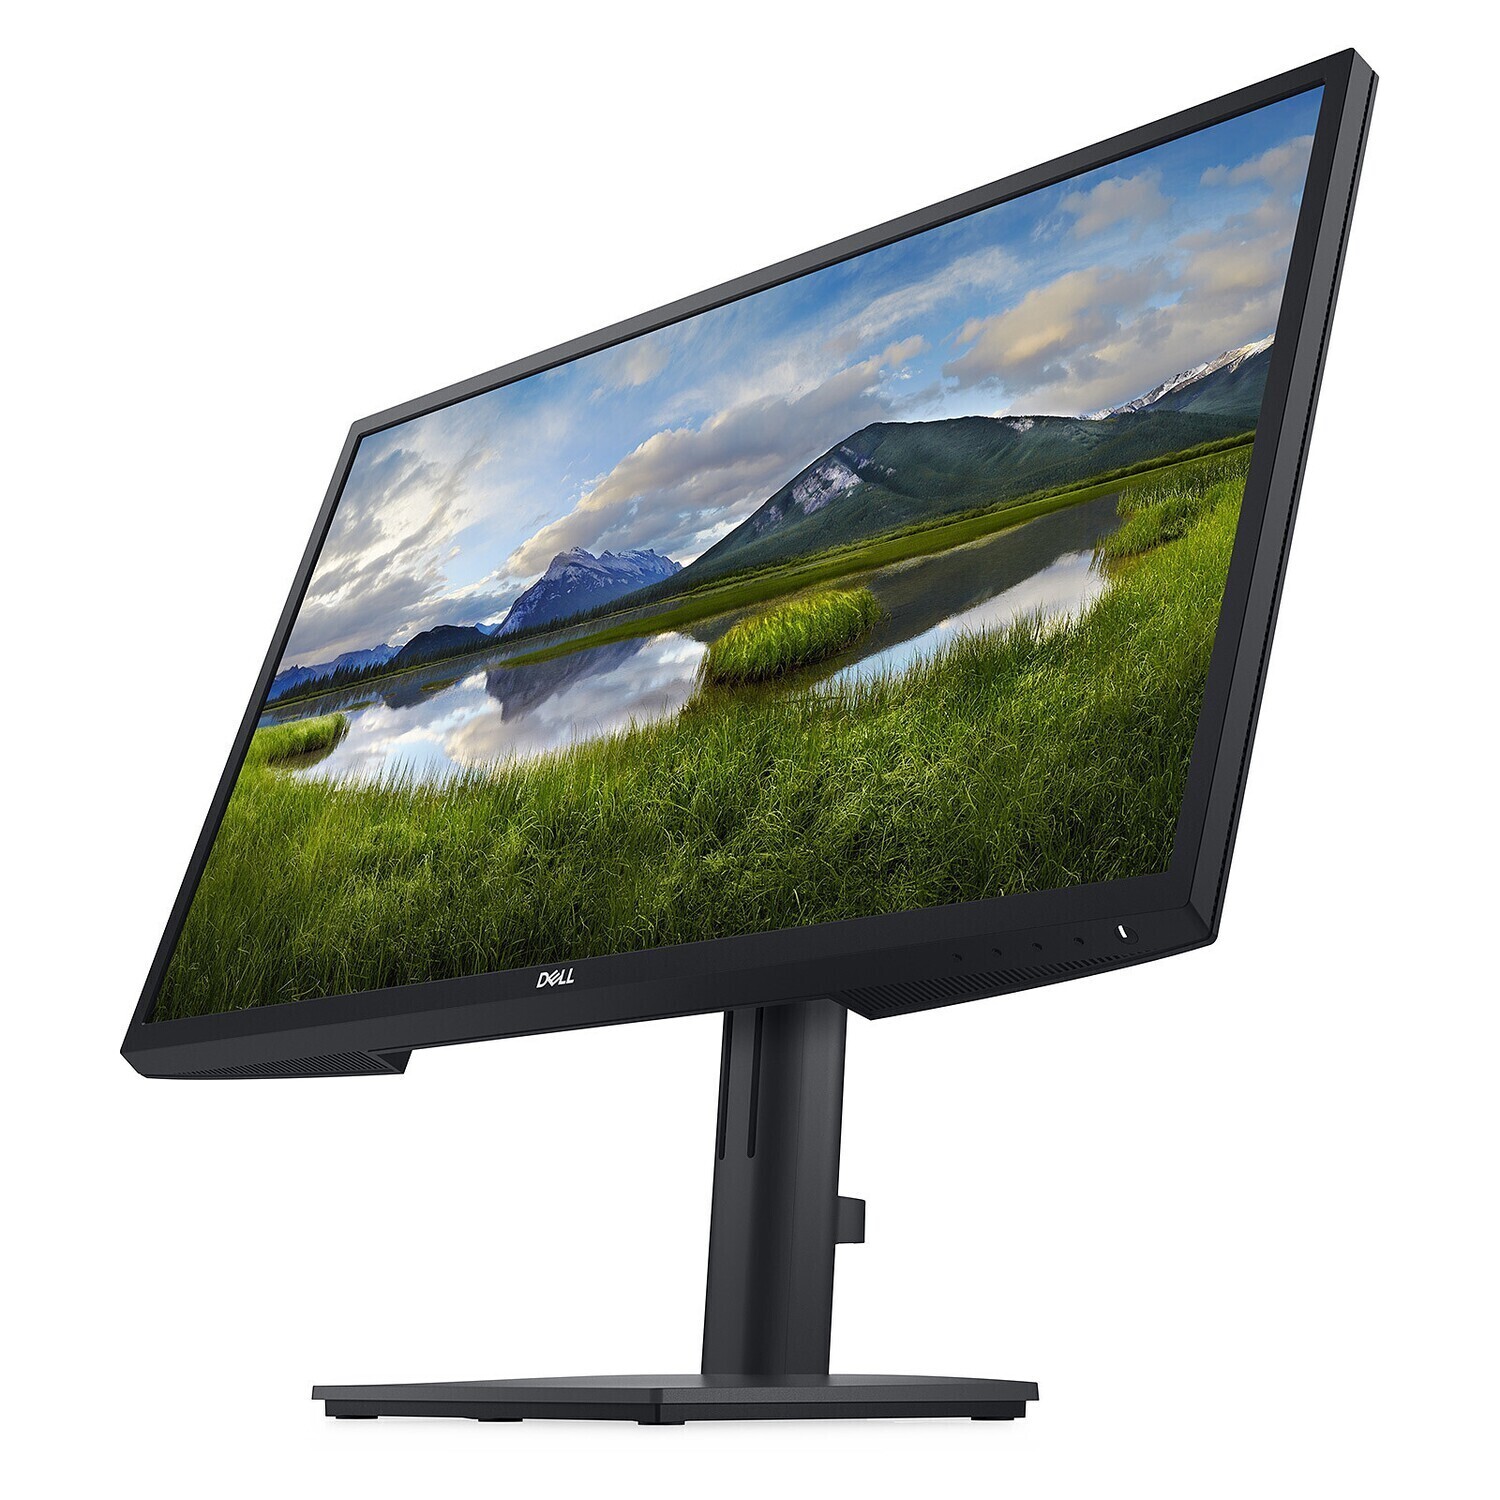 Monitor DELL E-series E2722HS 27in, 1920x1080, FHD, IPS Antiglare, 16:9, 1000:1, 300 cd/m2, 8ms/5ms, 178/178, DP, HDMI, VGA, Speakers, Tilt, Height Adjust, 3Y